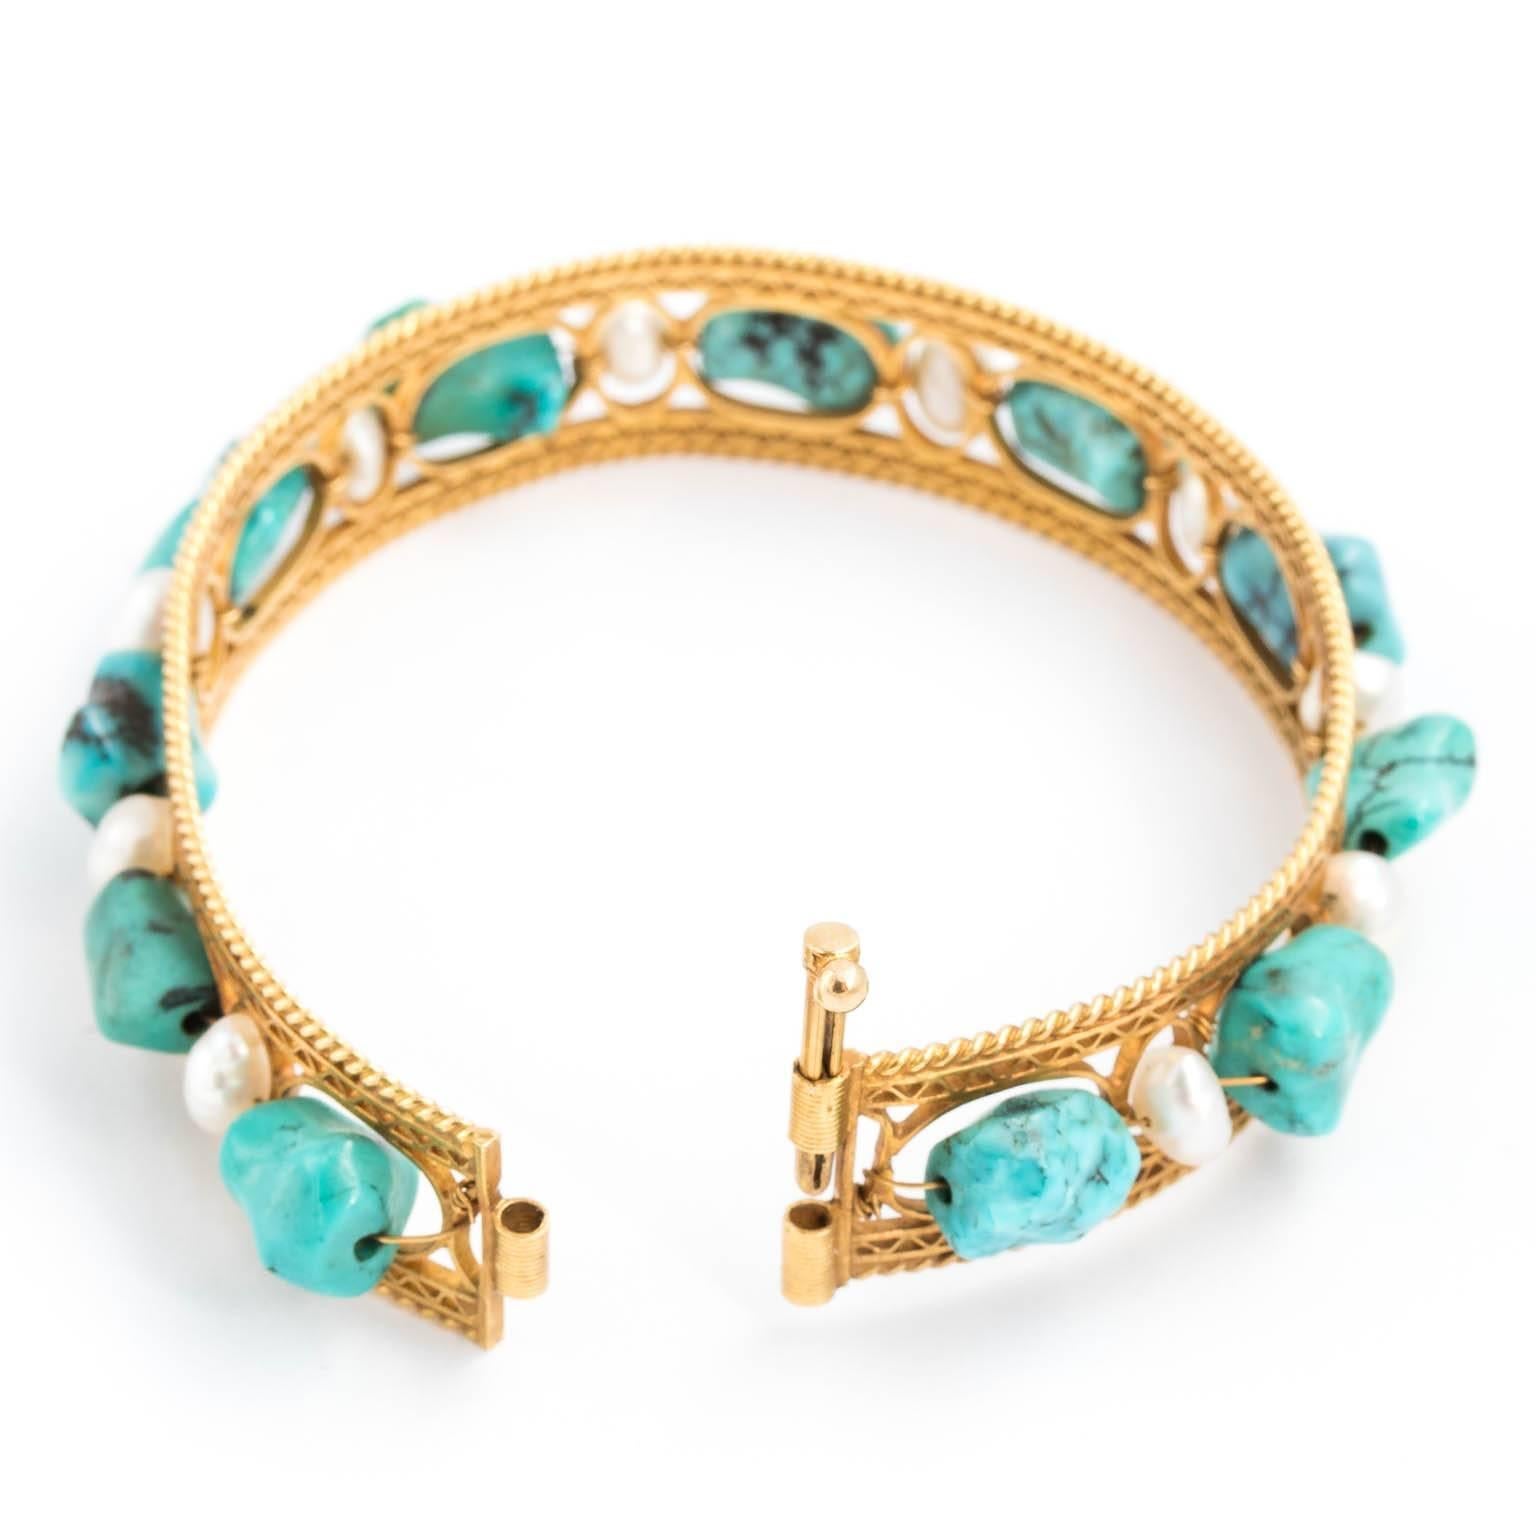 Circa 1930-1950 18 karat gold bangle with natural Persian turquoise and cultured pearls. An 18 karat bangle from circa 1930-1950 using open work design on edges with large Persian Turquoise pieces interspersed with cultured pearls around the